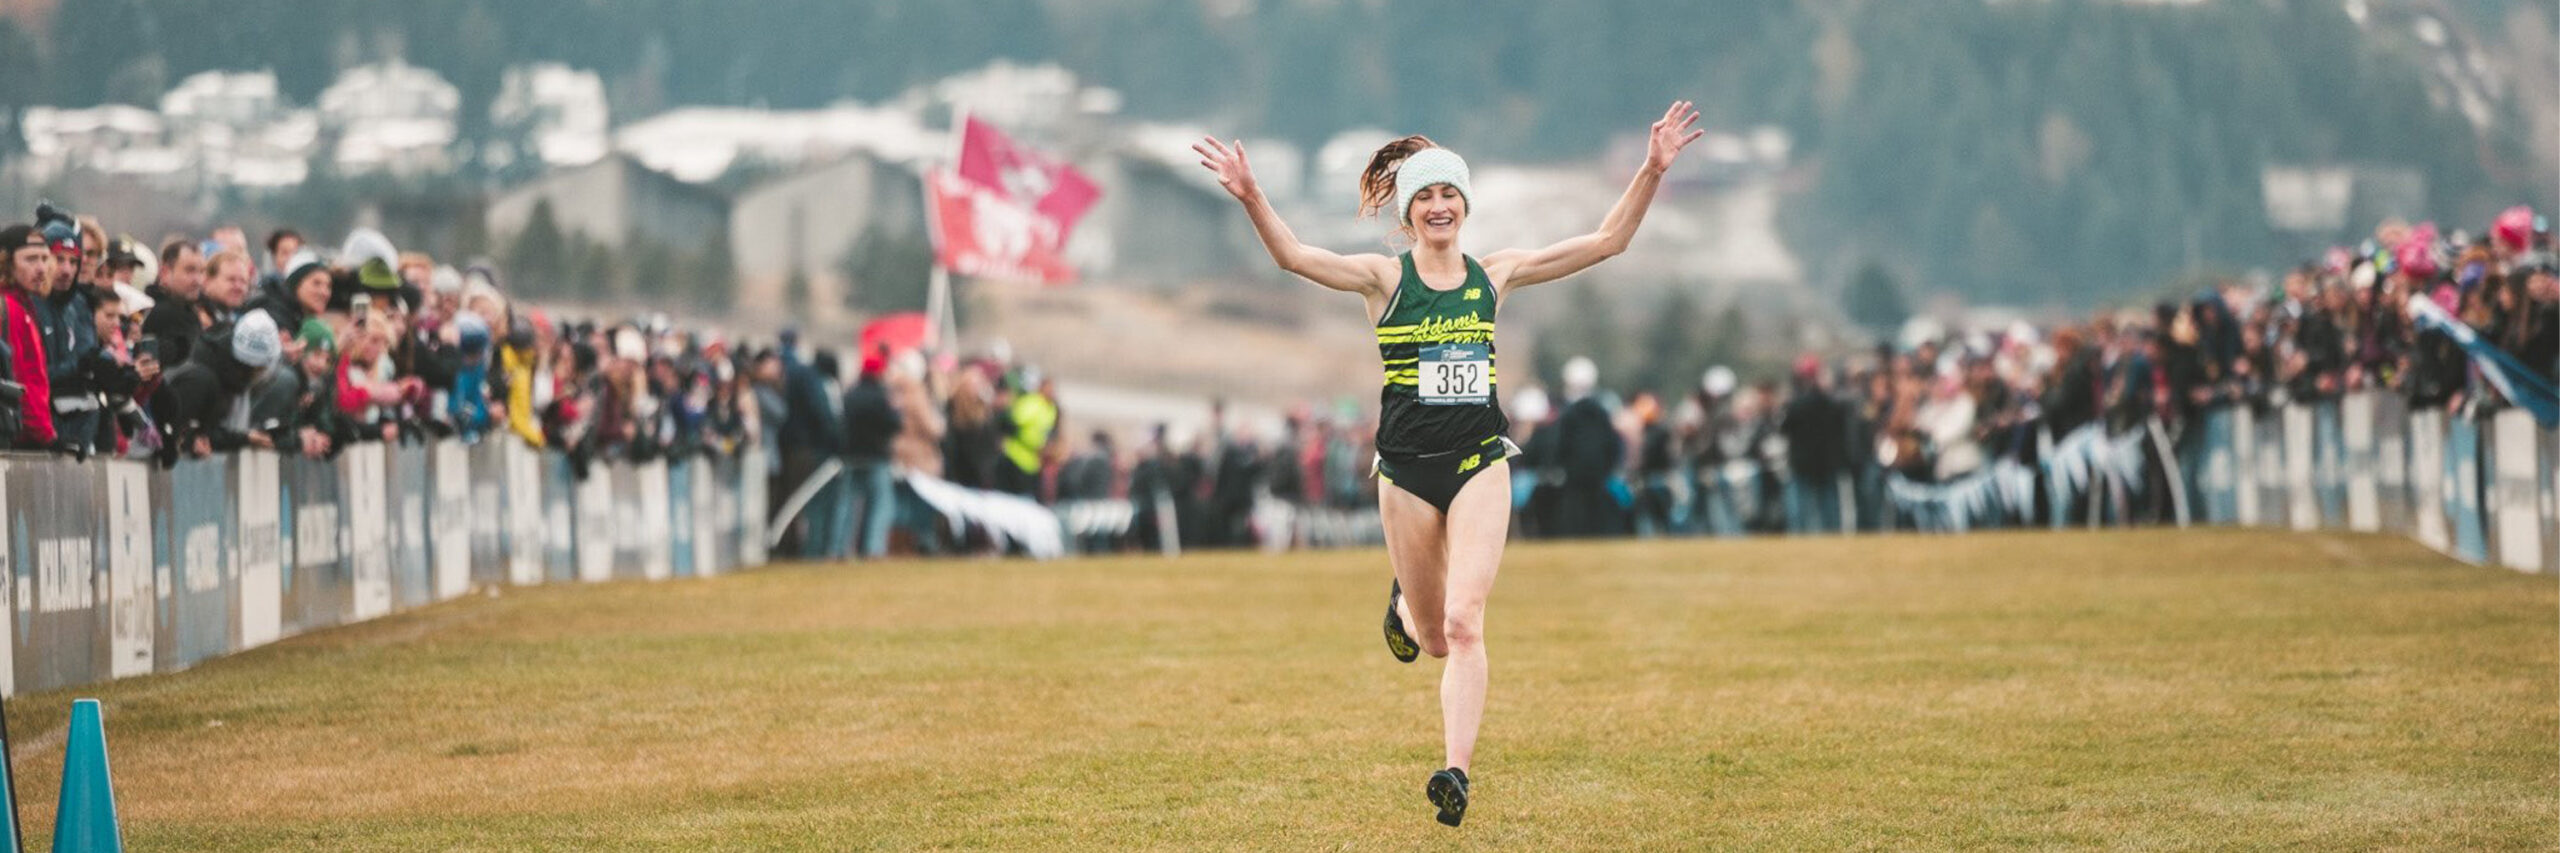 young woman crosses the finish line at a cross-country meet, with spectators on each side.